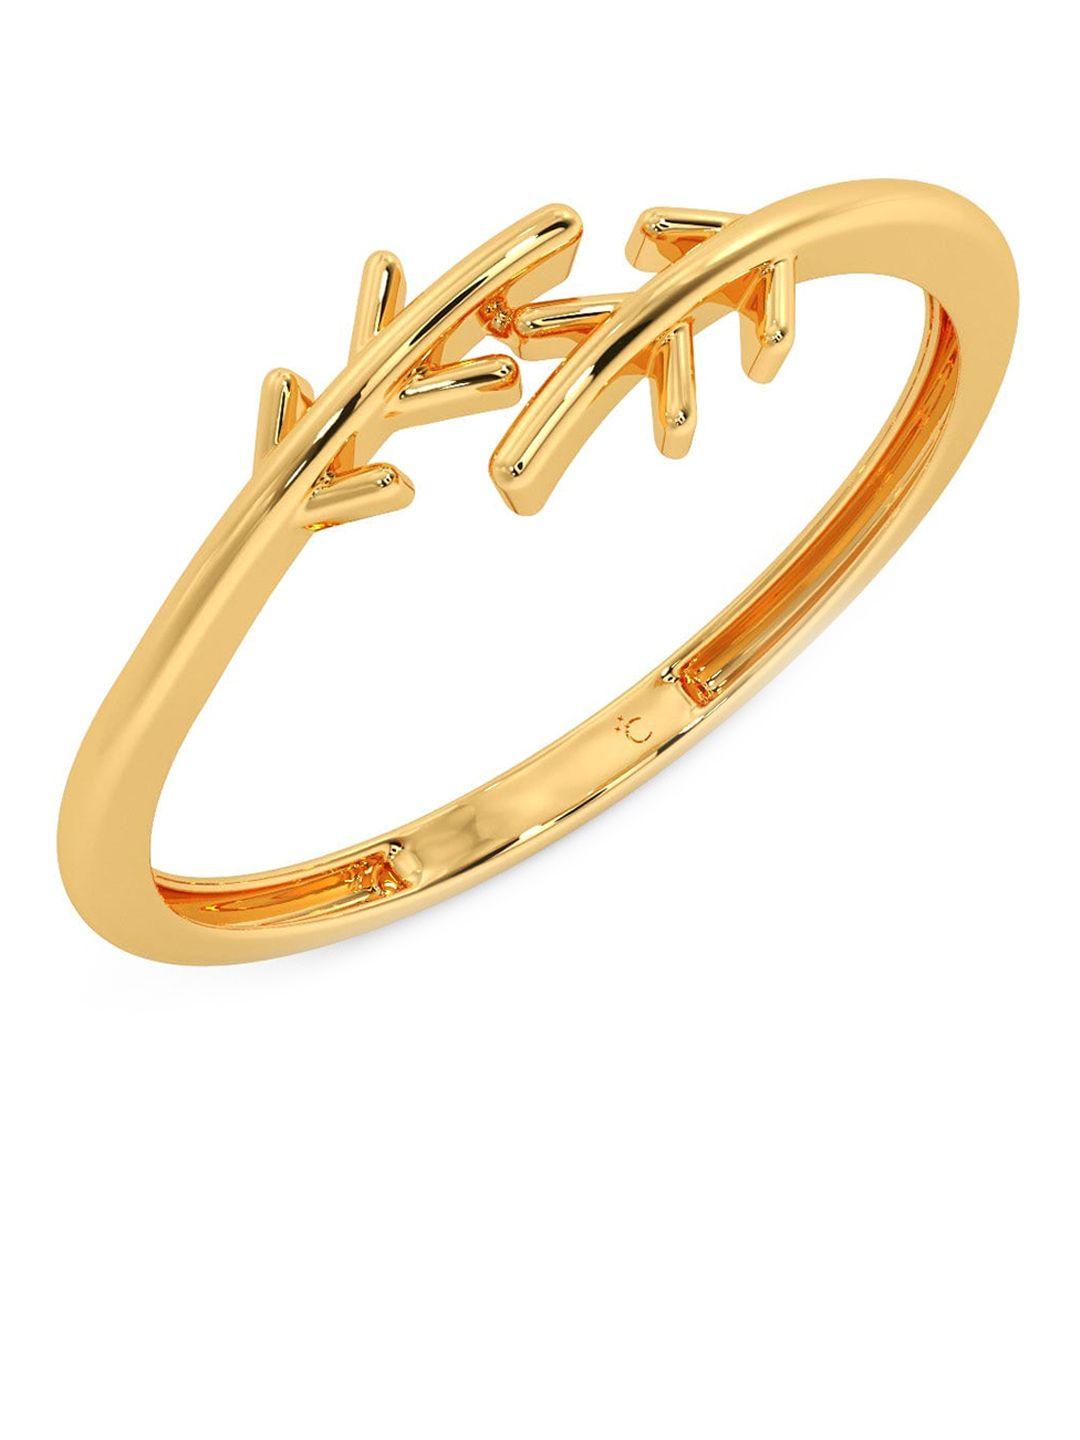 candere-a-kalyan-jewellers-company-18kt-gold-ring-0.83gm